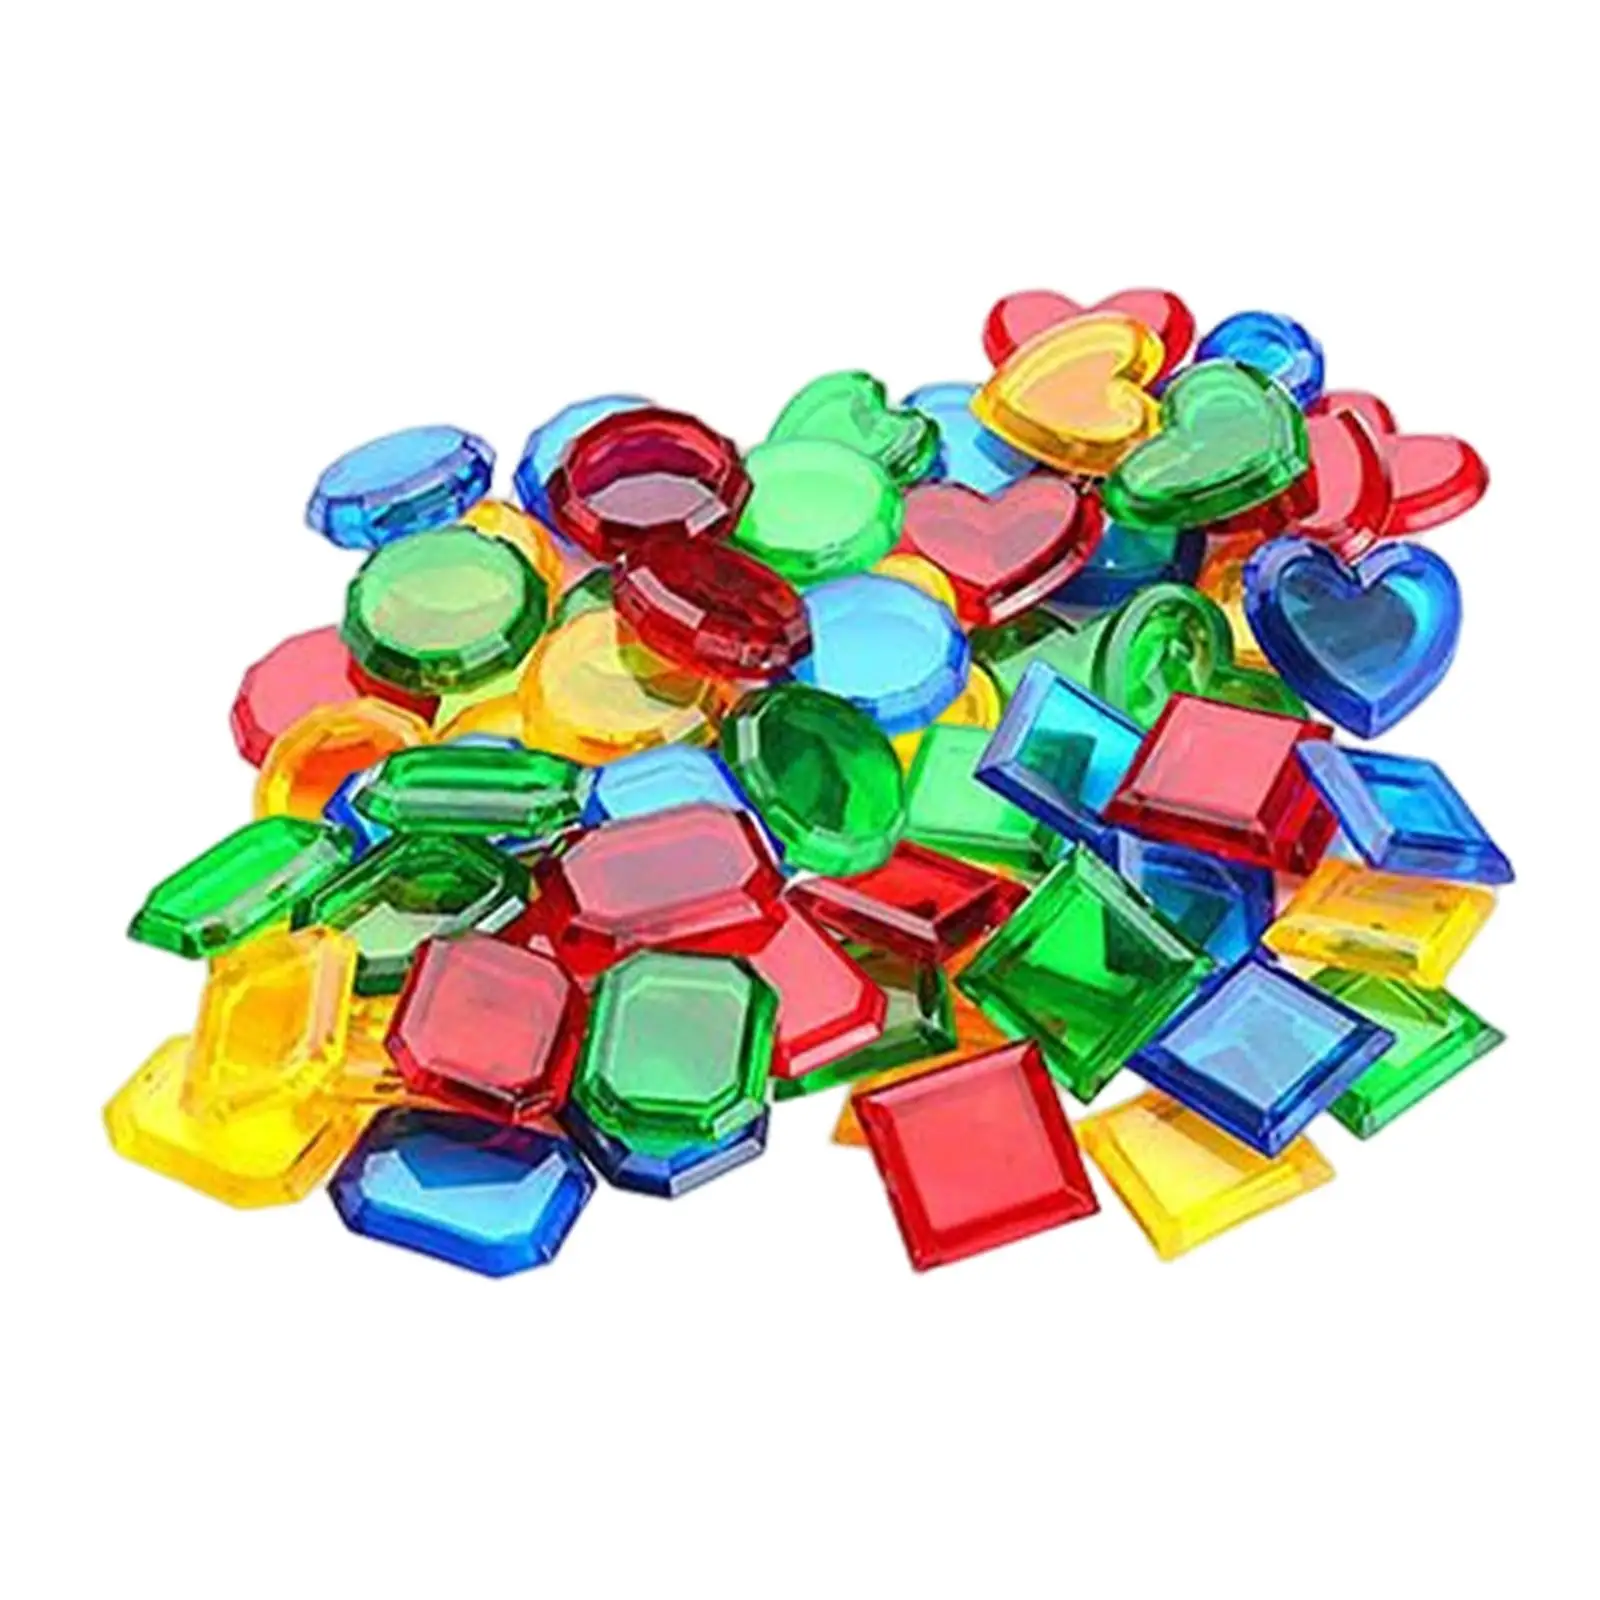 32 Pieces Dive Throw Toy Drop Resistant Motor Skill Game for Beach Adults Kids Girls Boys